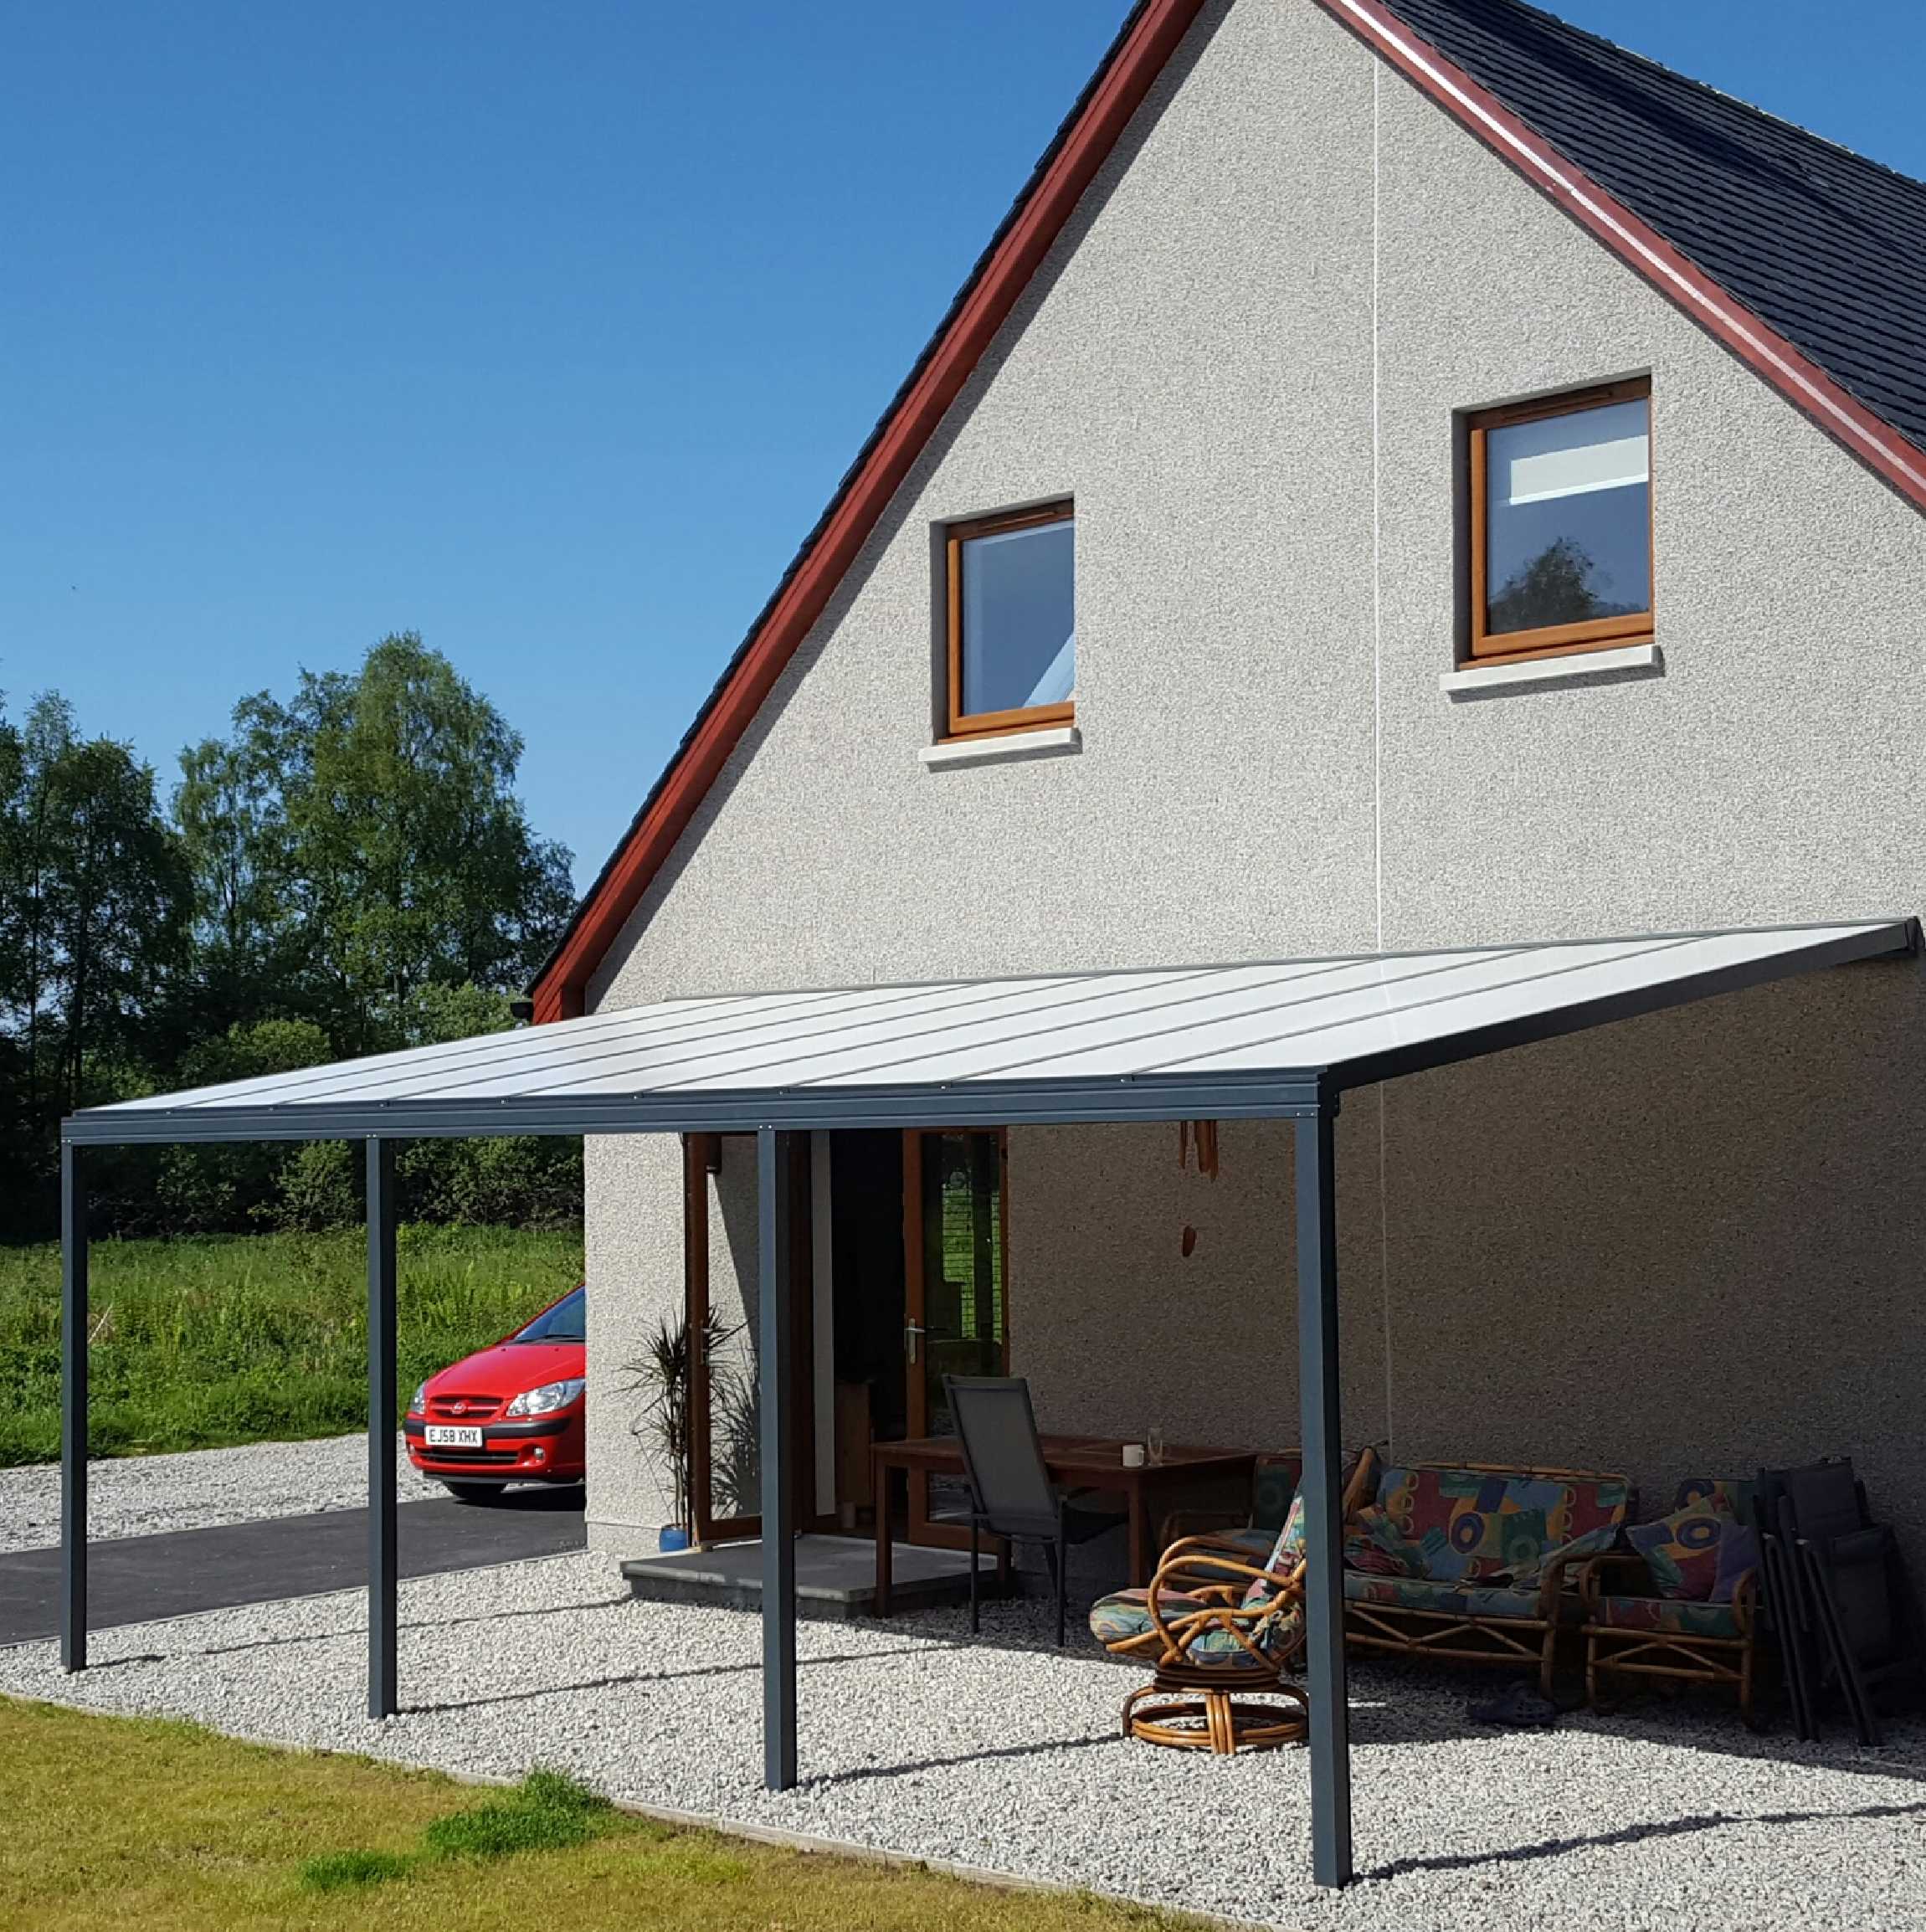 Great selection of Omega Smart Lean-To Canopy, Anthracite Grey, 16mm Polycarbonate Glazing - 12.0m (W) x 4.0m (P), (5) Supporting Posts